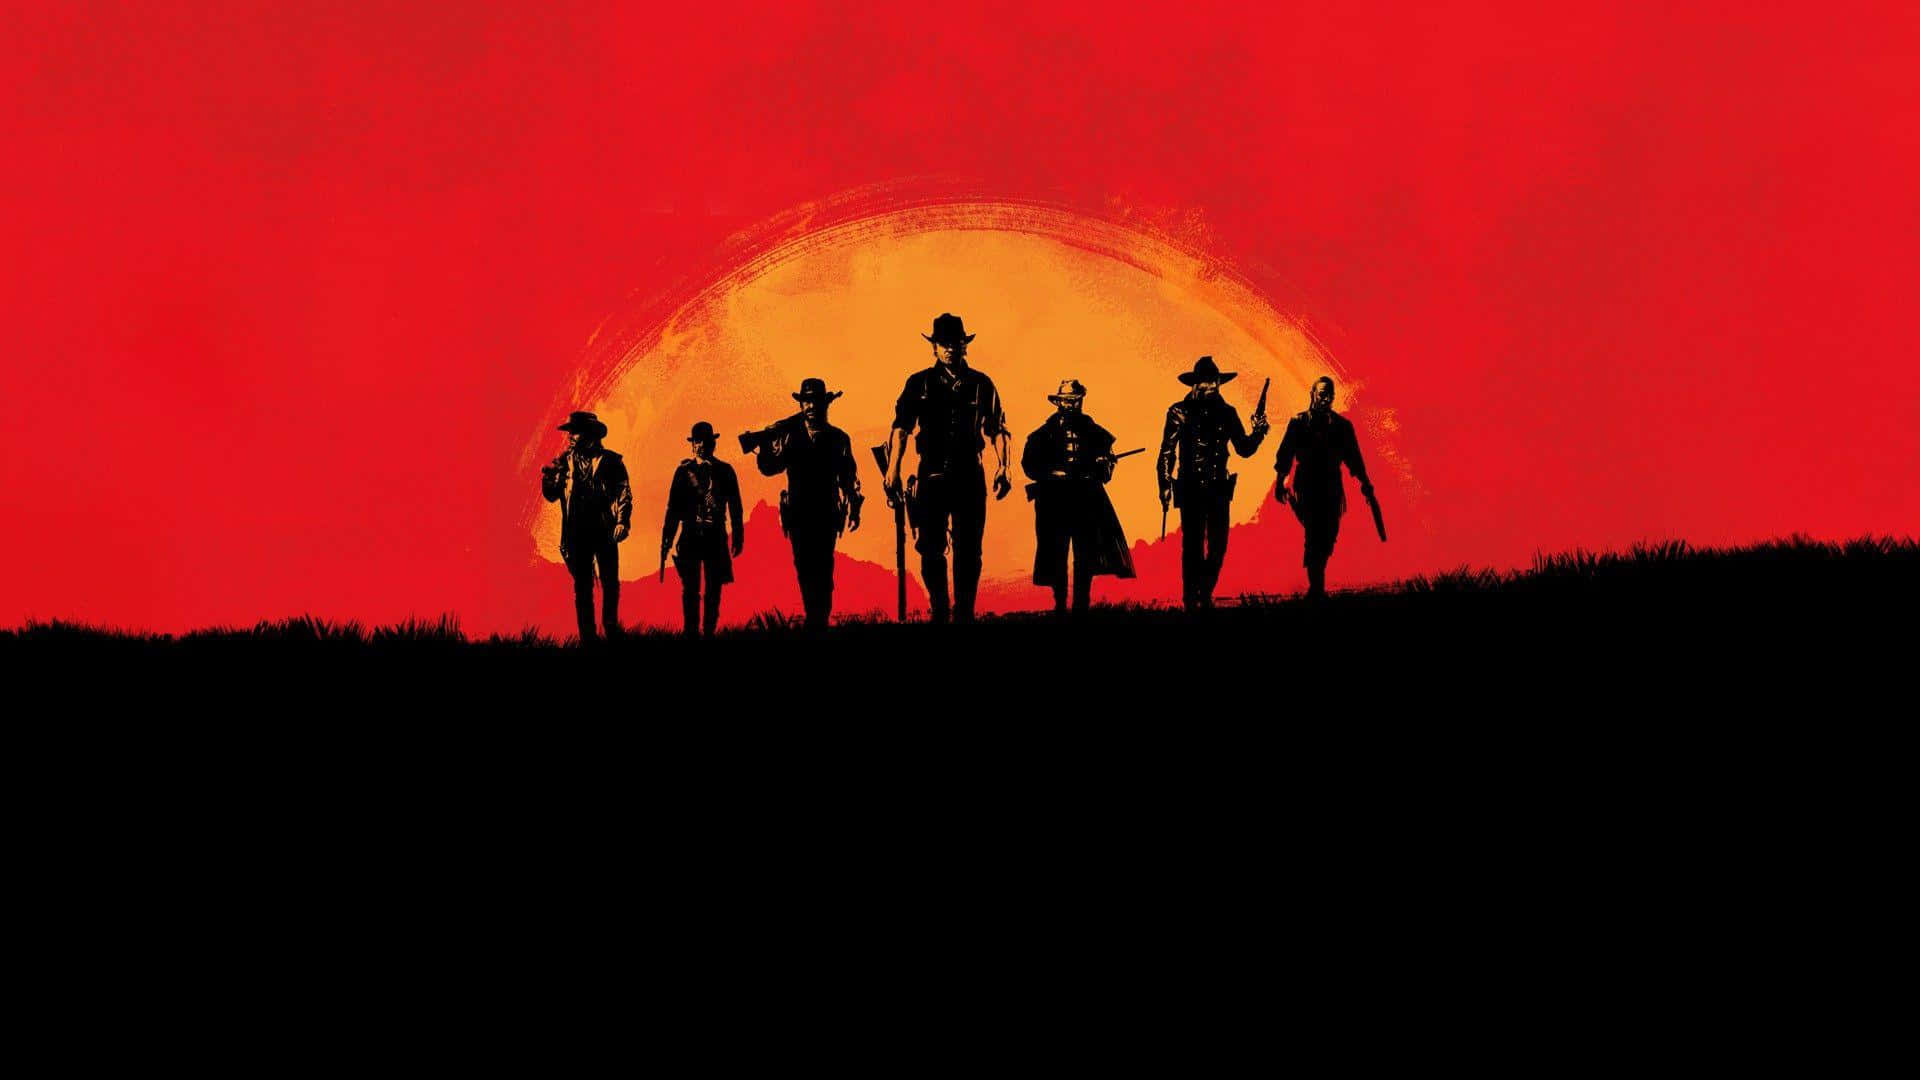 Characters Landscape Format 1920x1080 Red Dead Redemption 2 Background